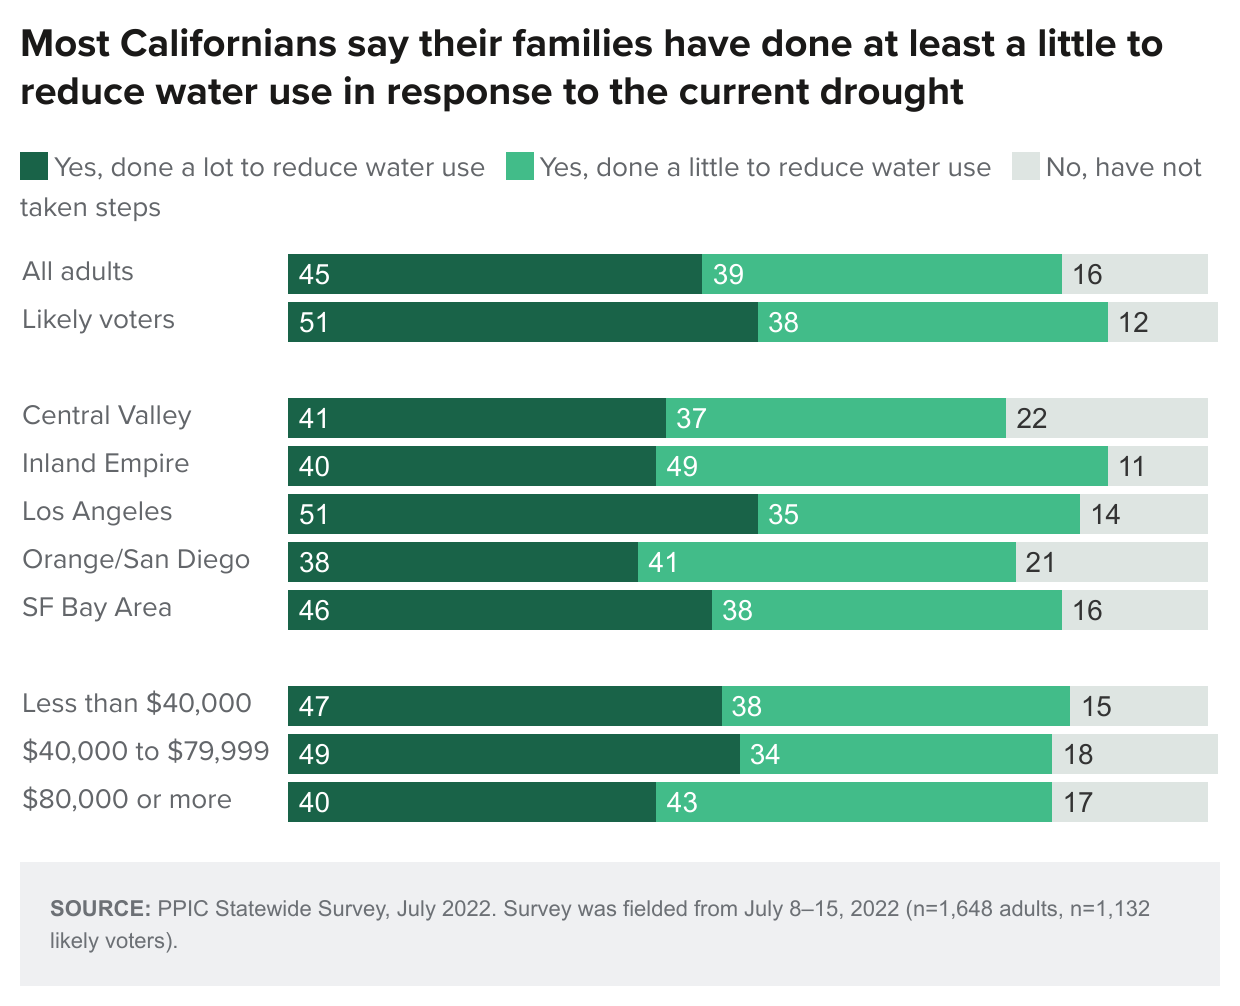 figure - Most Californians say their families have done at least a little to reduce water use in response to the current drought